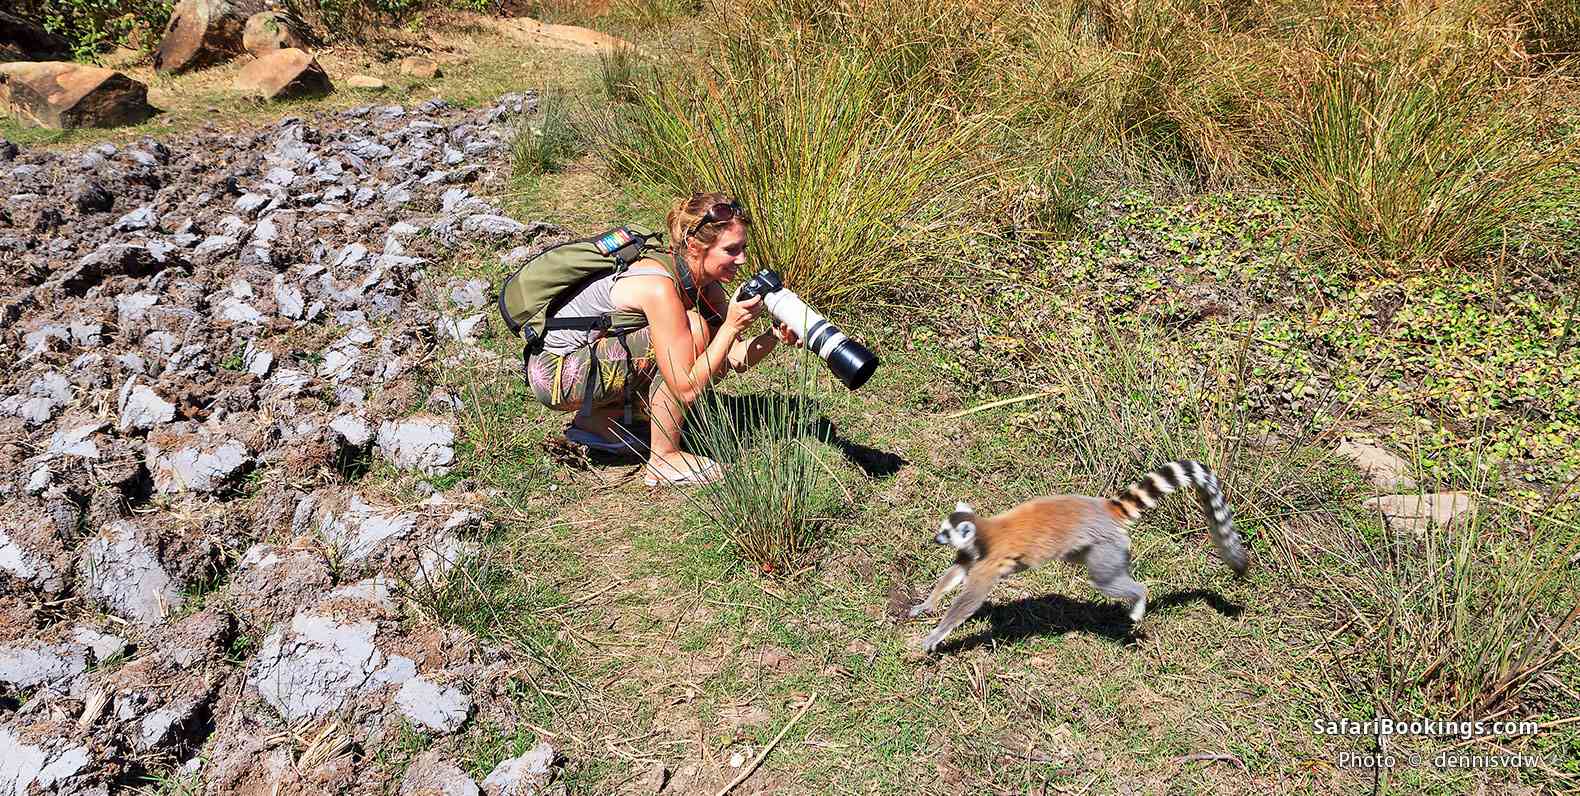 Tourist photographing a ring-tailed lemur